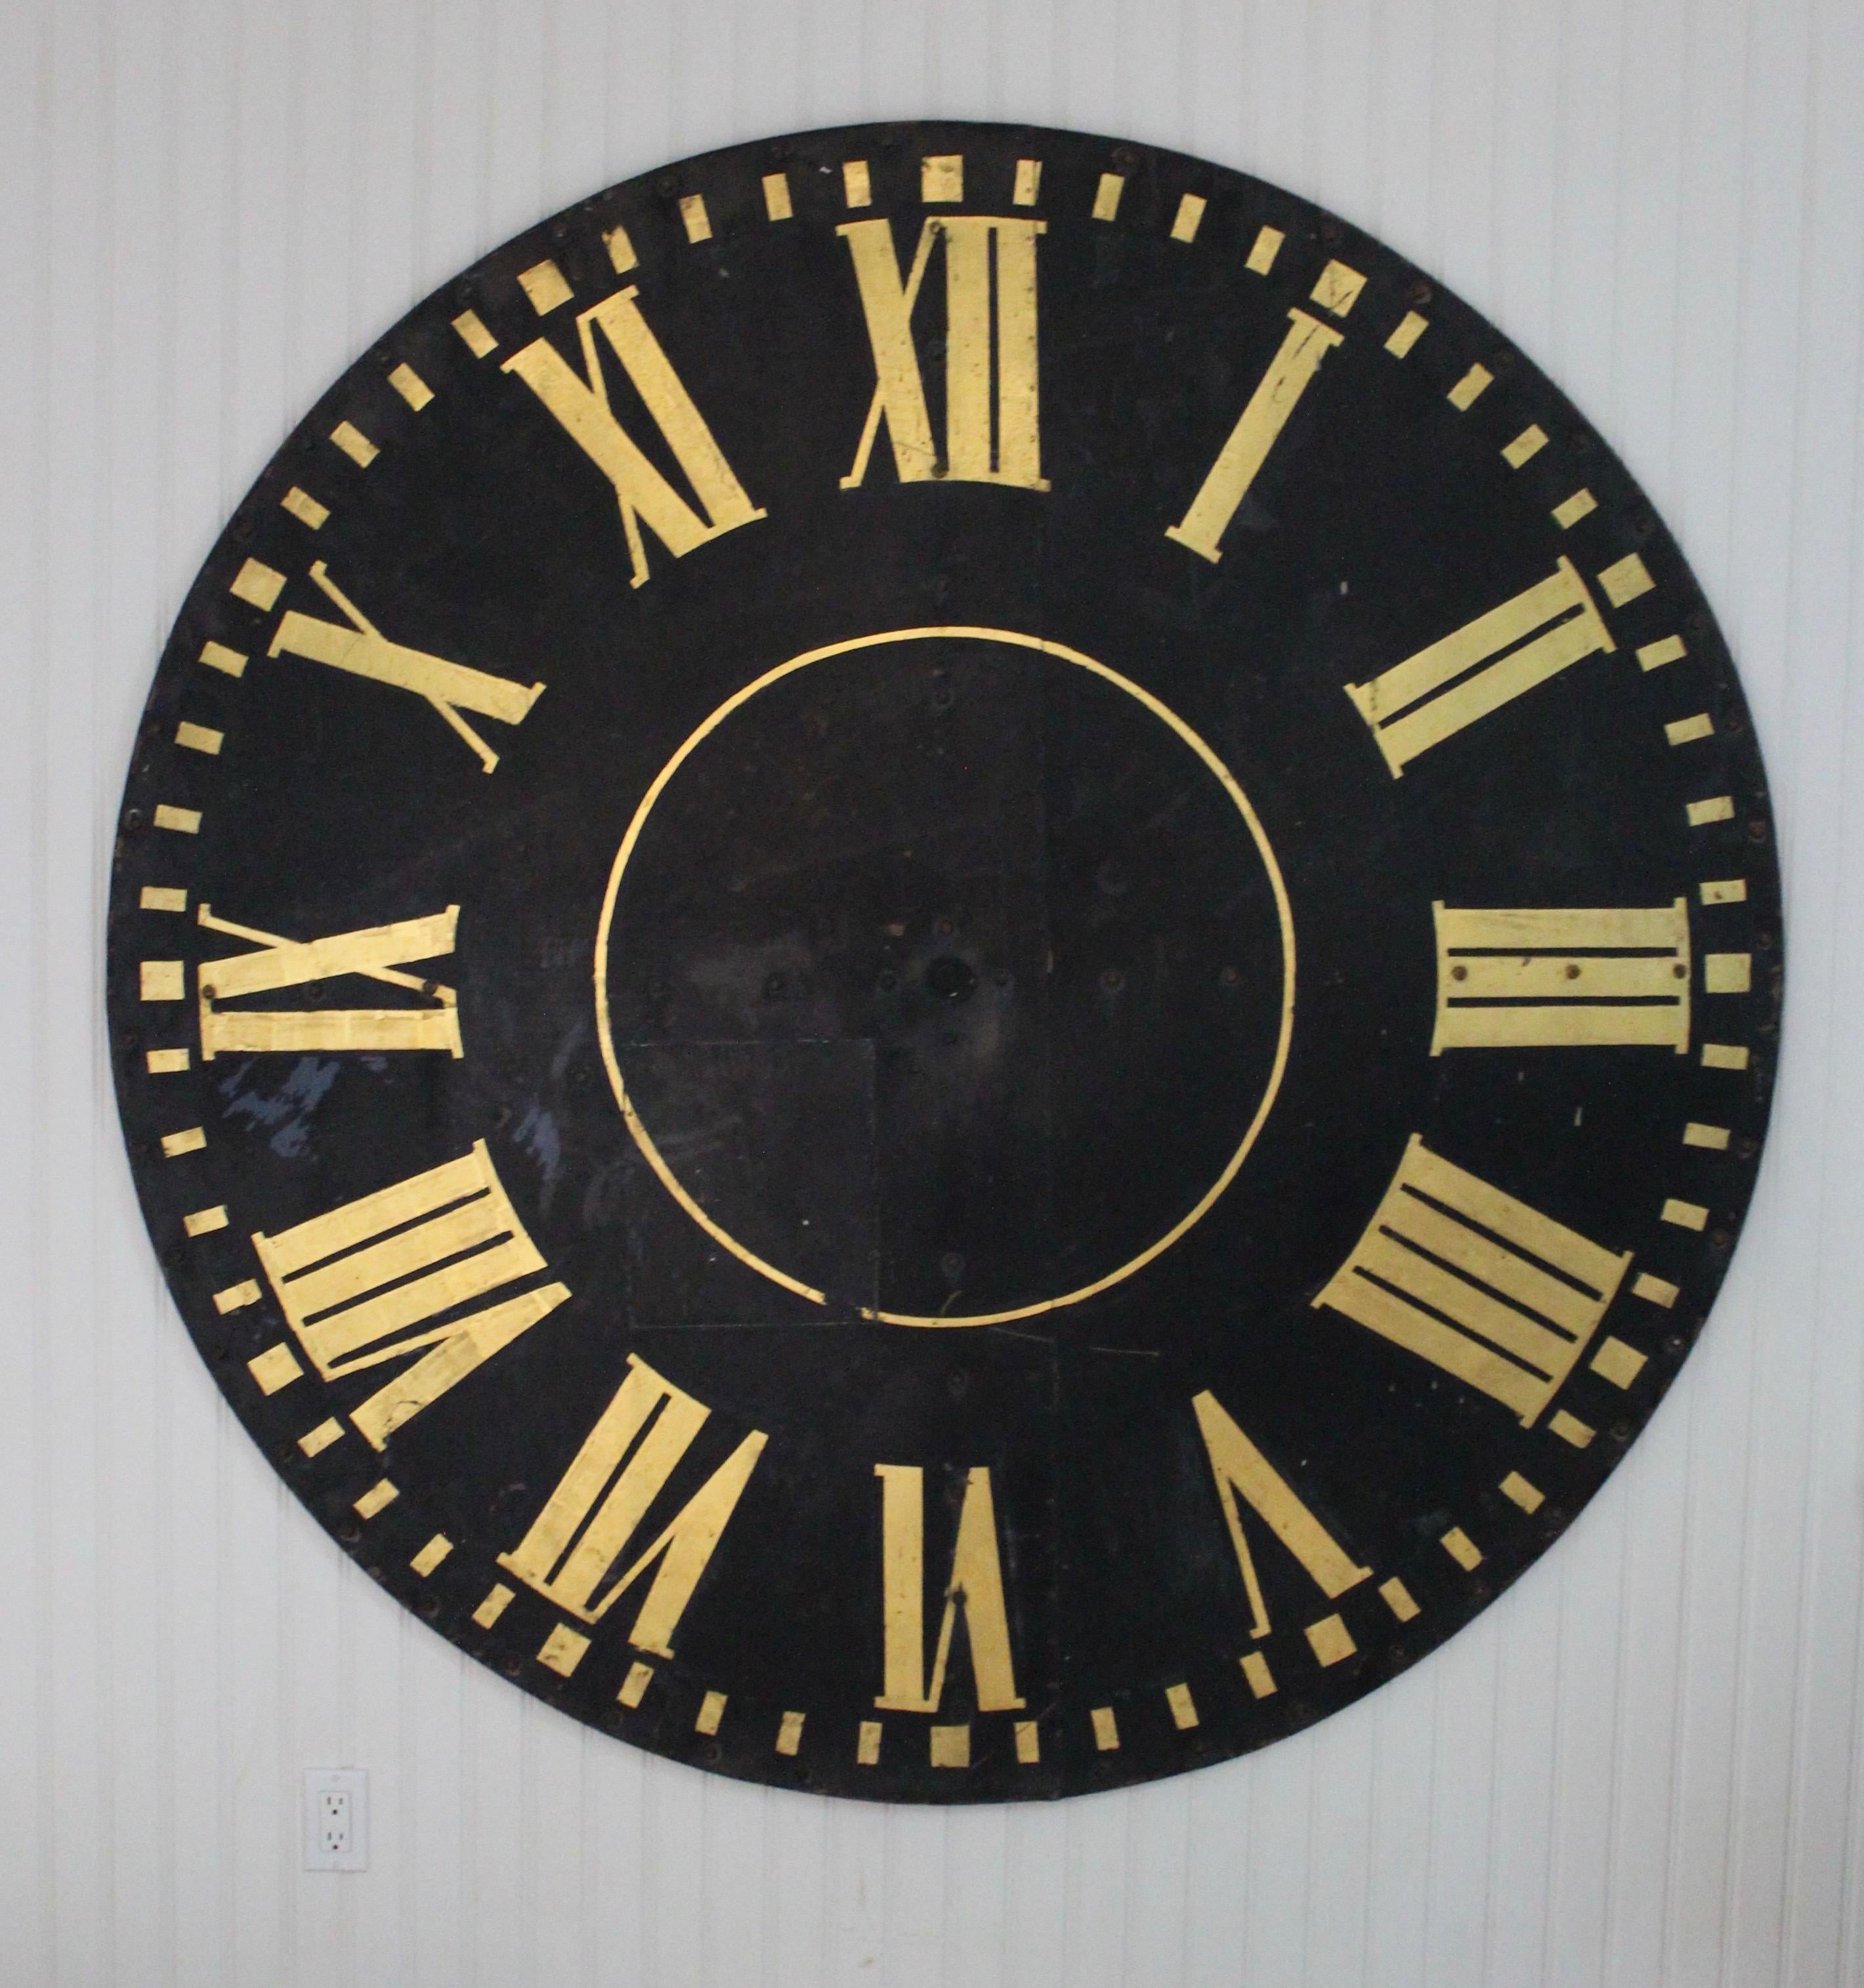 Monumental industrial tower clock face with gilded Roman numbers.